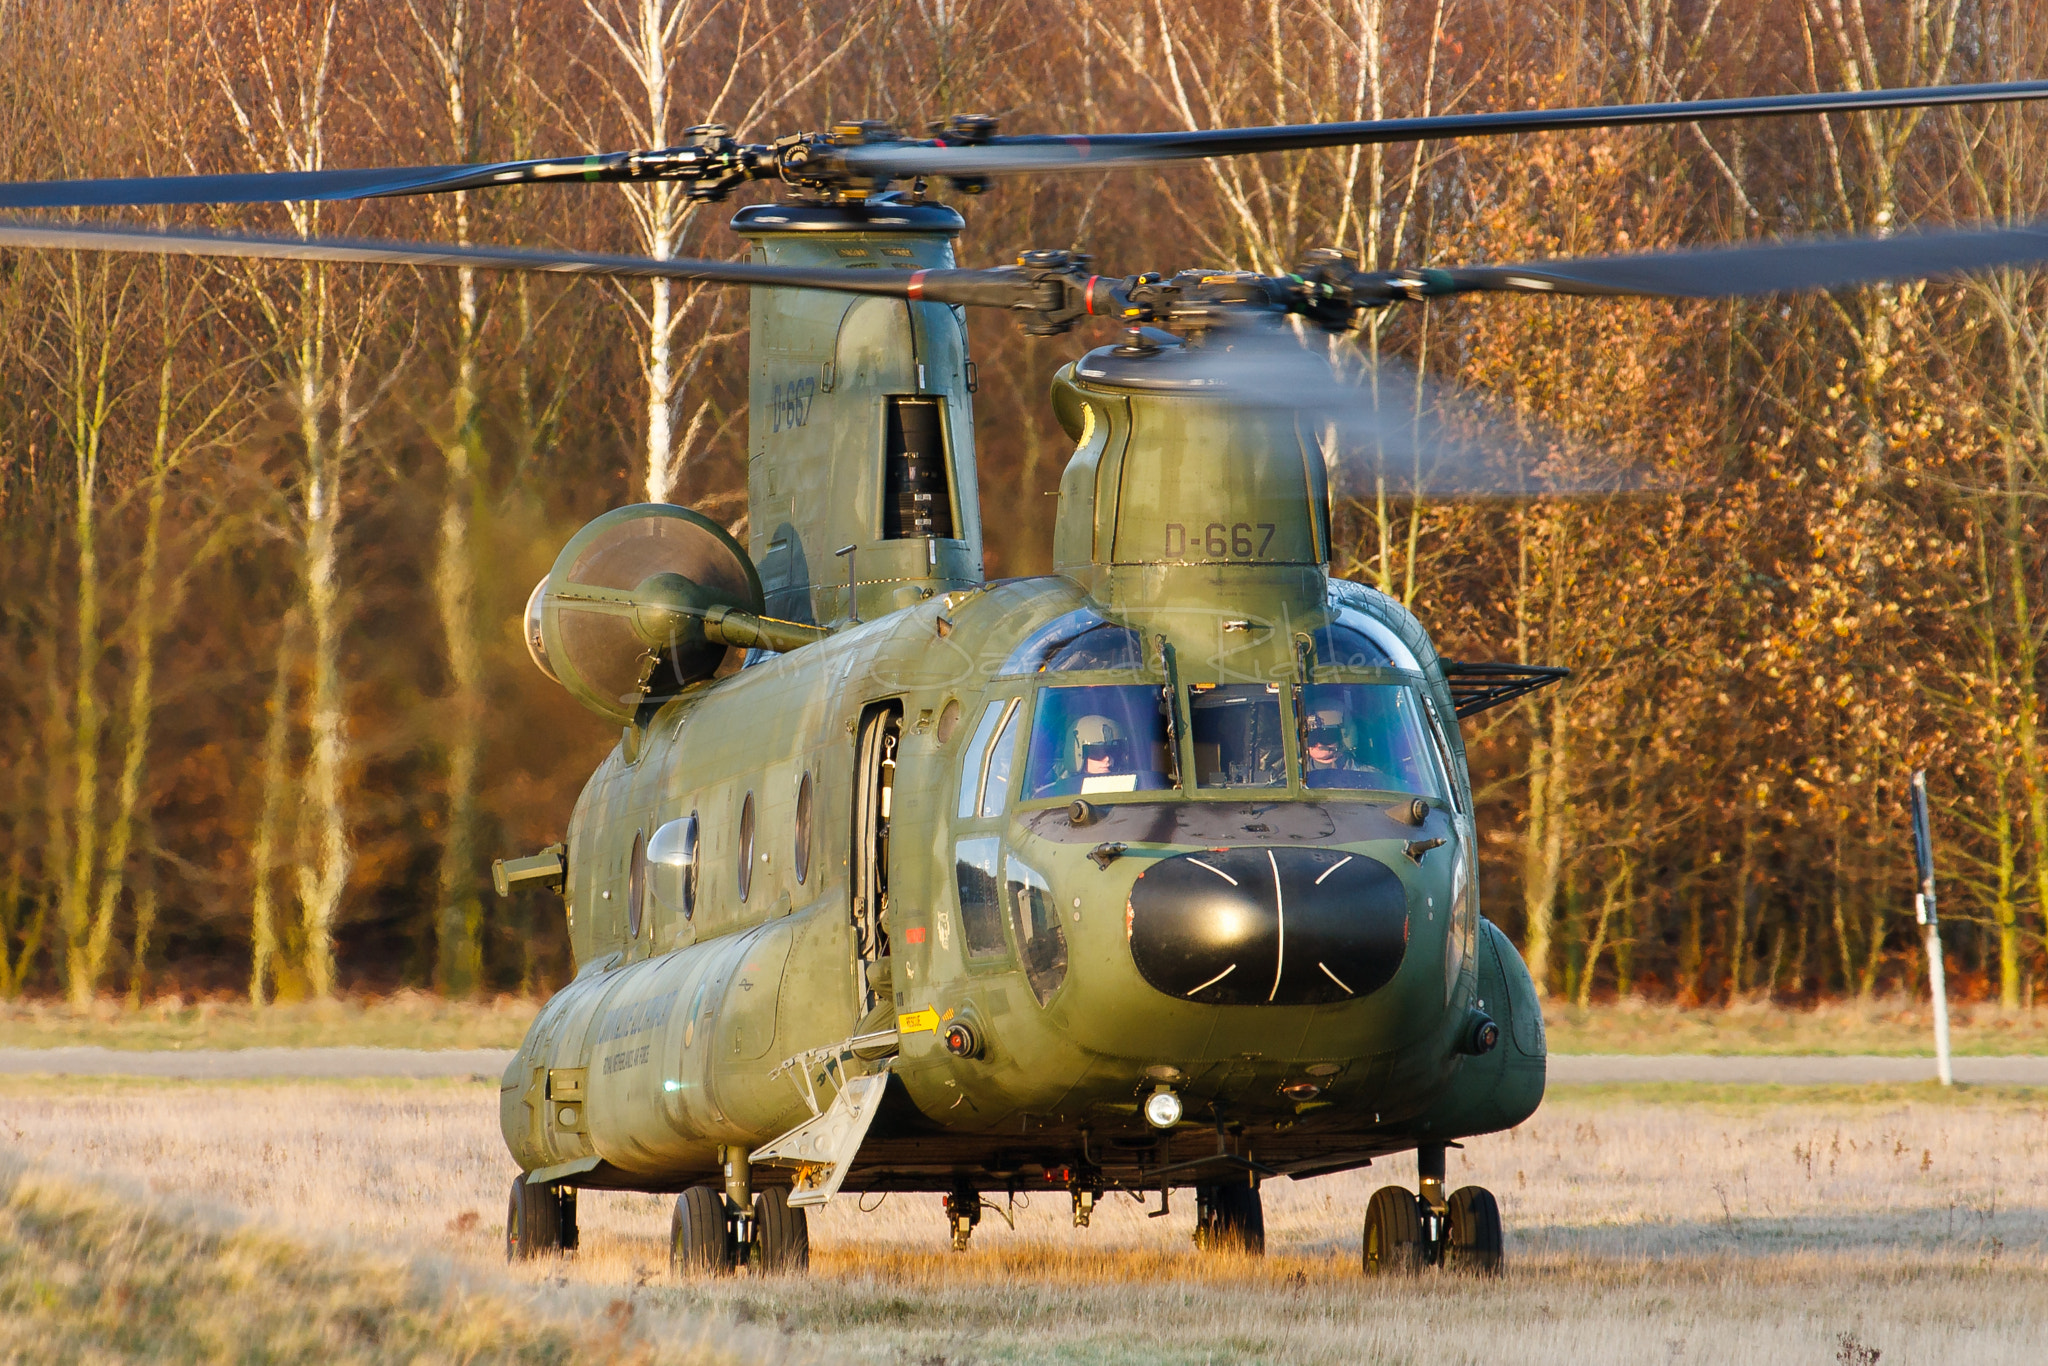 Canon EOS 40D sample photo. Royal netherlands air force ch-47d chinook d-667 photography